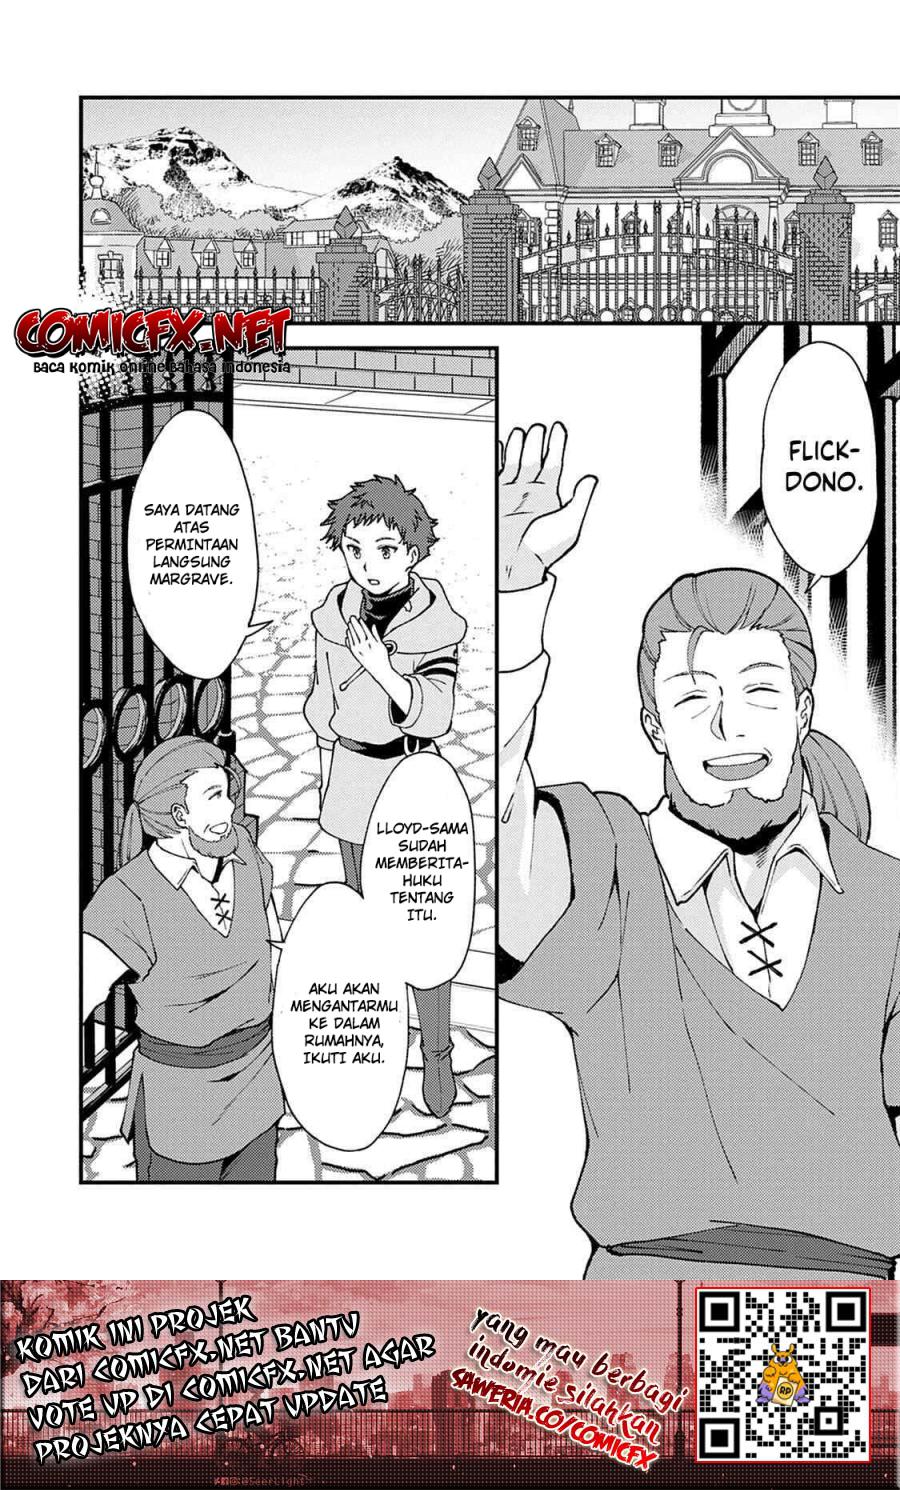 A Sword Master Childhood Friend Power Harassed Me Harshly, So I Broke off Our Relationship and Make a Fresh Start at the Frontier as a Magic Swordsman Chapter 08.1